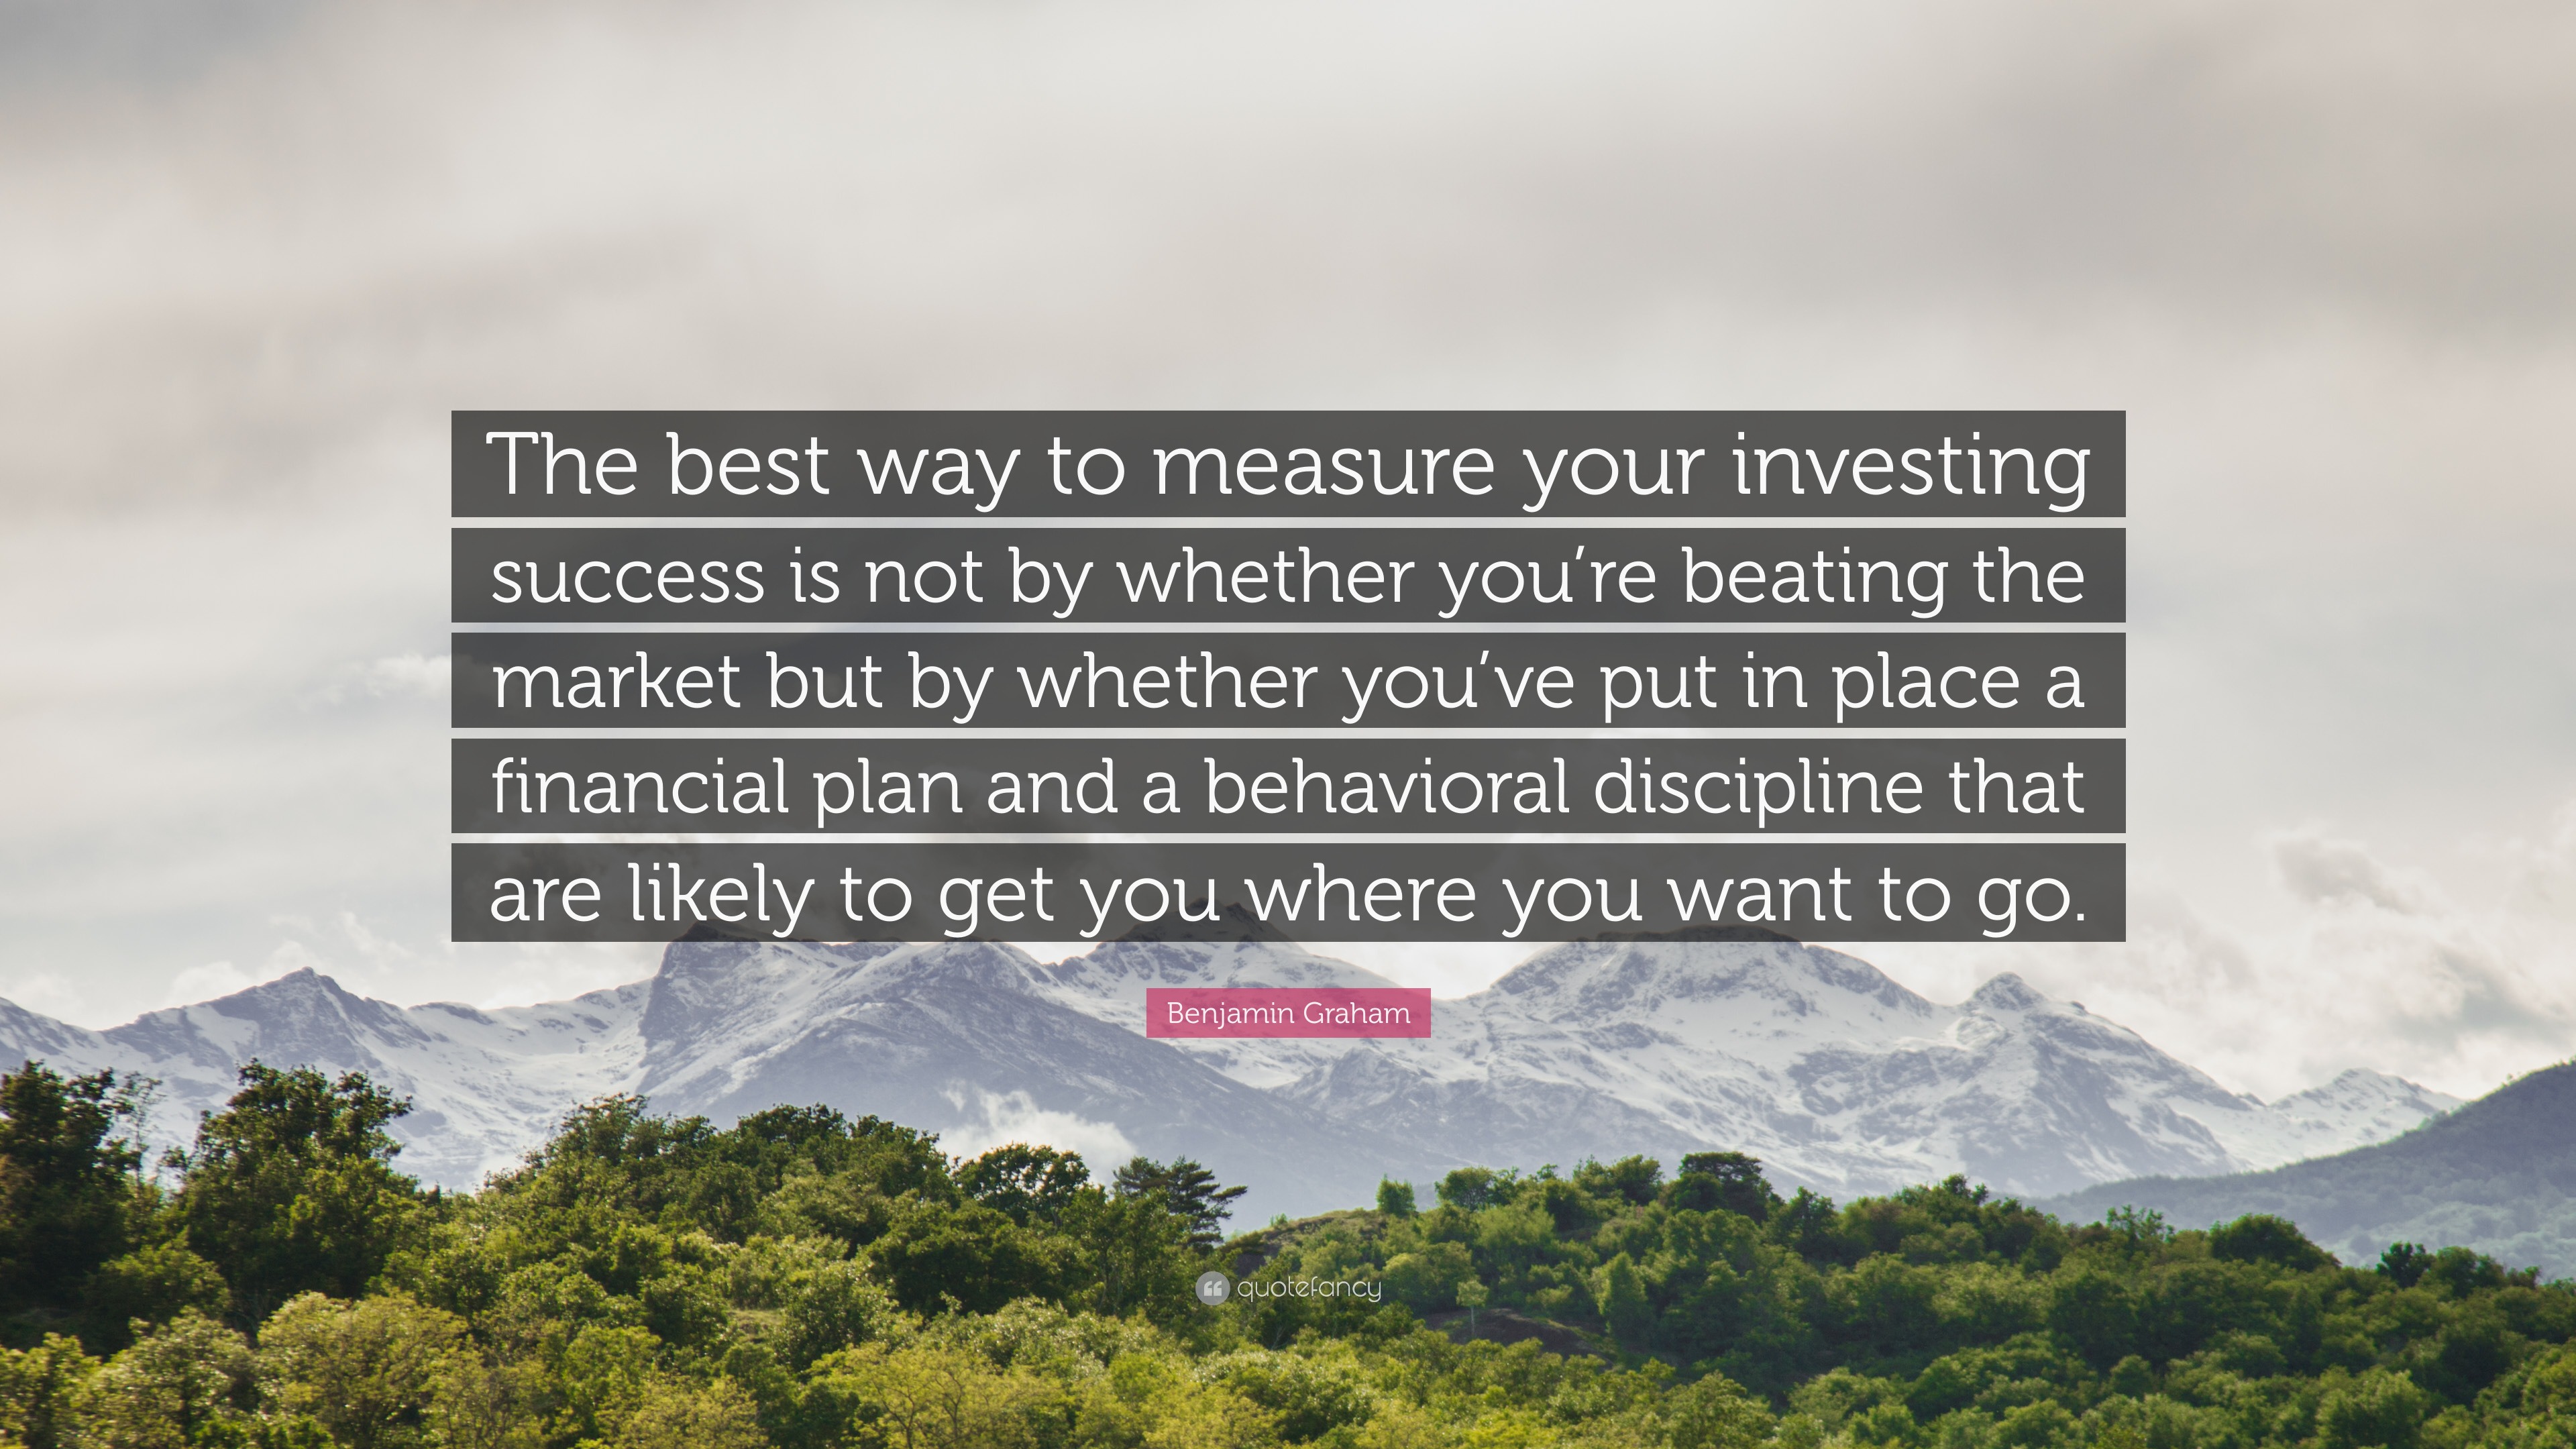 Benjamin Graham Quote: “The best way to measure your investing success is  not by whether you're beating the market but by whether you've put in ”